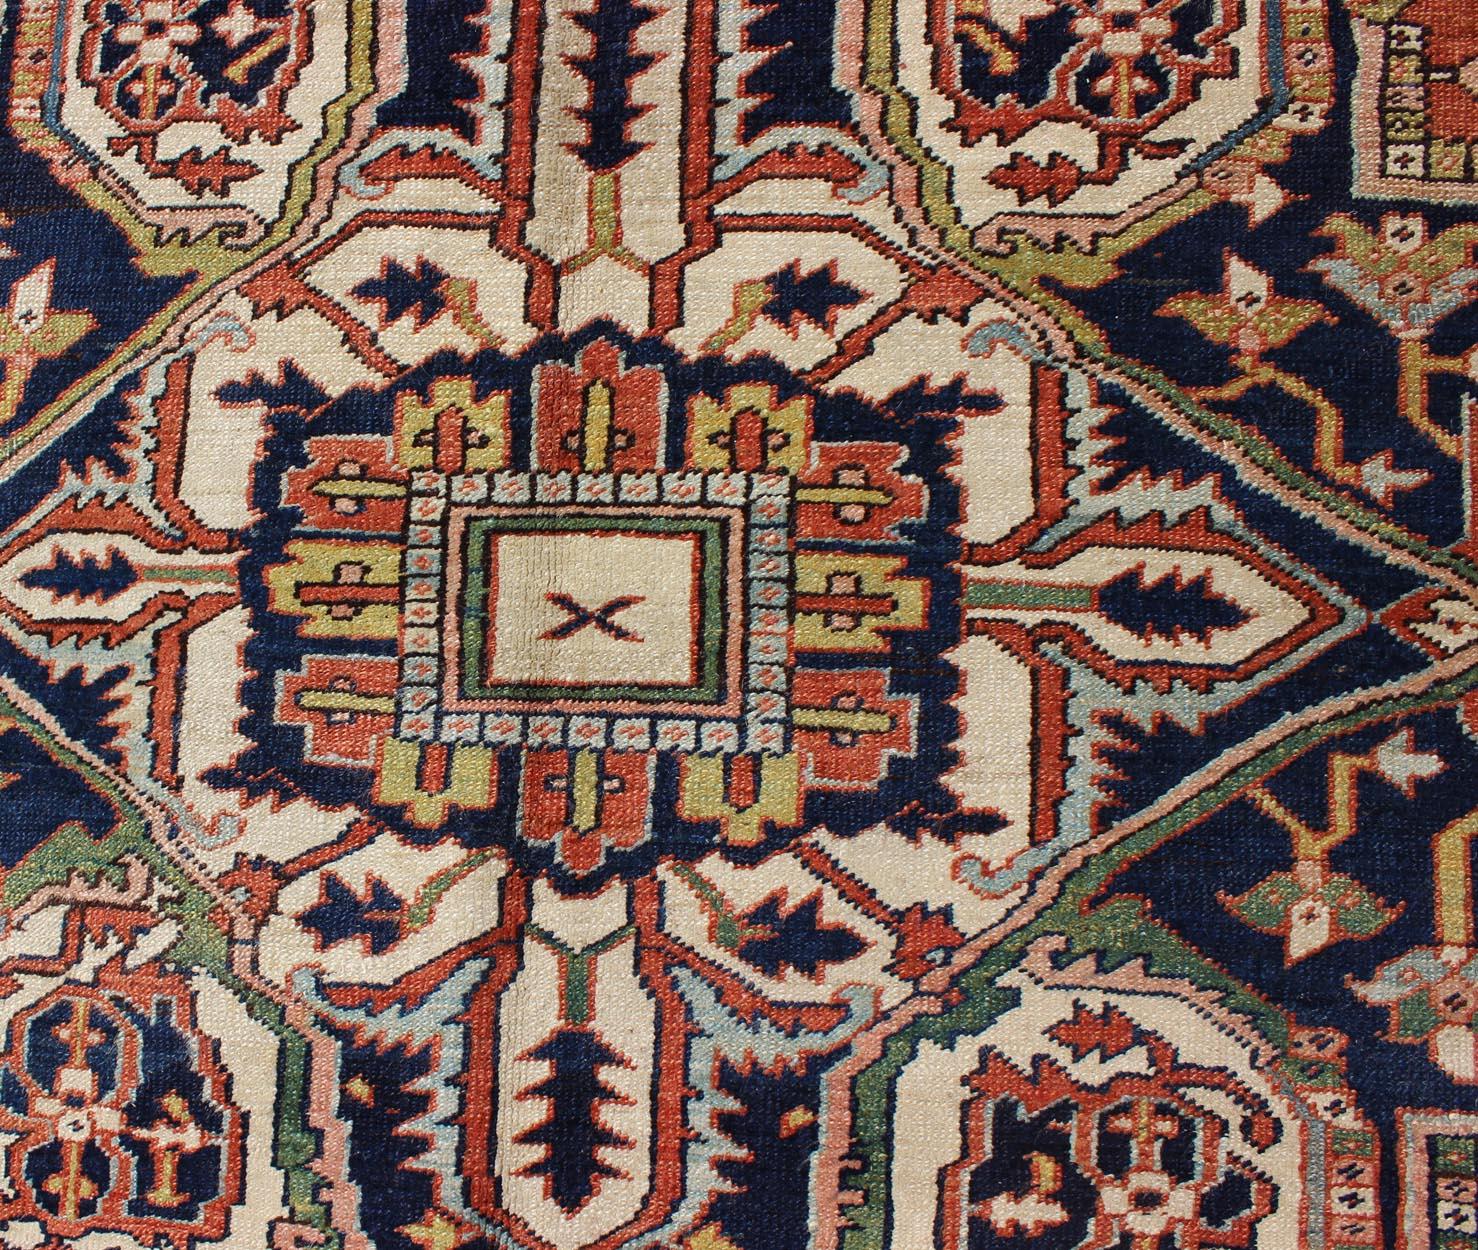 Antique Persian Serapi Rug with Bold Medallion in Orange, Navy Blue and Green 1